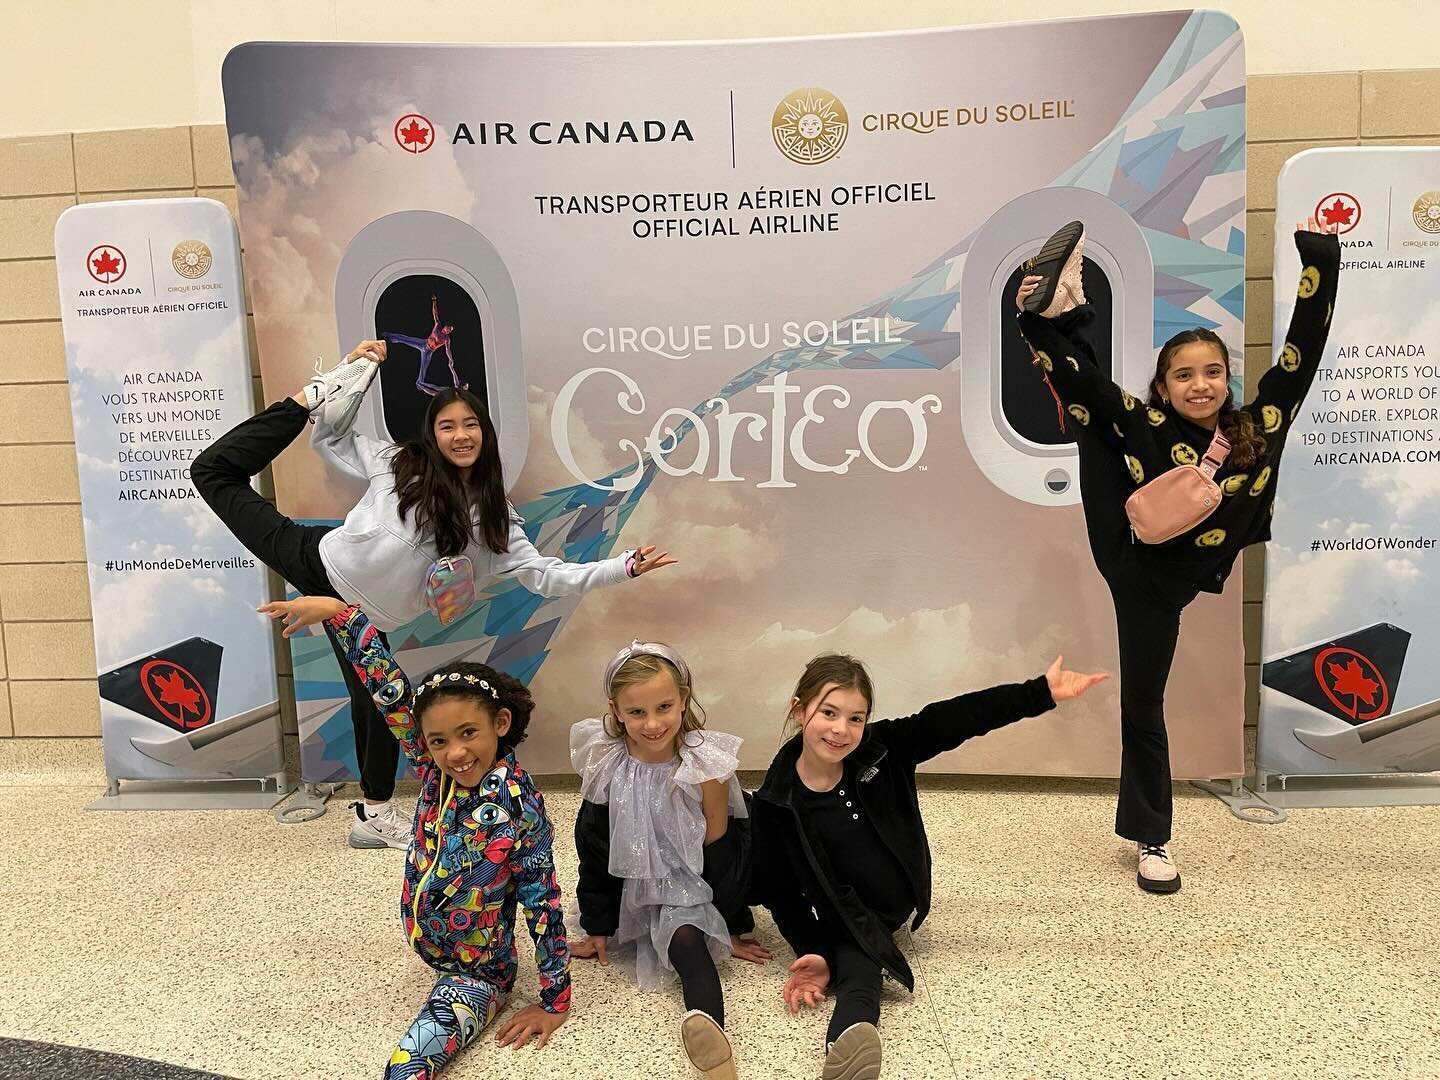 Cai Circus goes to Corteo! We had a fun time with a few of our troupe members &amp; staff tonight. Thank you @cirquedusoleil, it was a spectacular show!
-
#caicircus #circus #corteo #circusshow #circustroupe #cirque #houston #houstoncircus